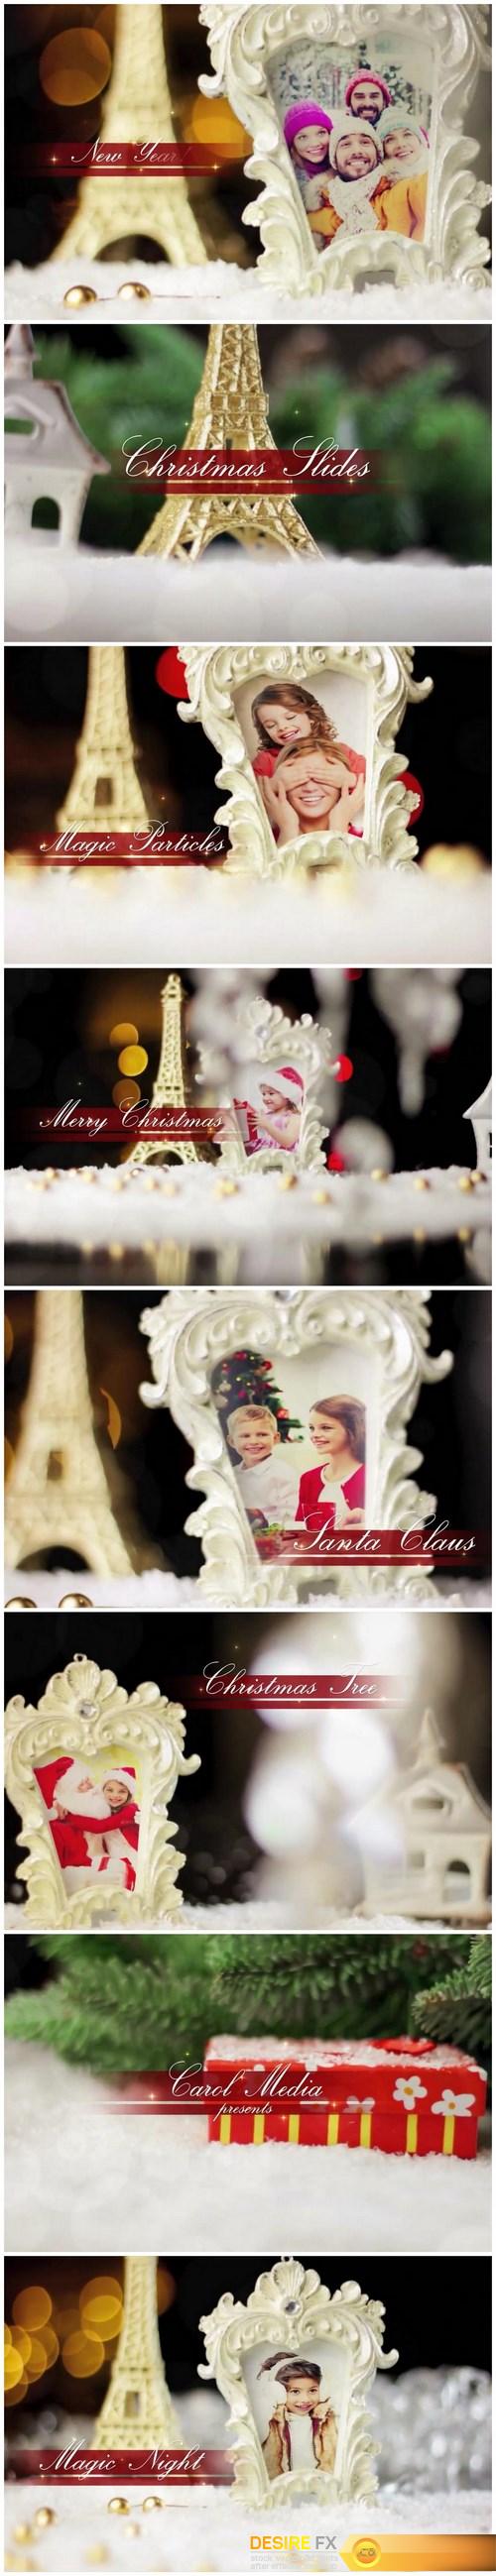 motion-array-after-effects-templates-christmas-slides